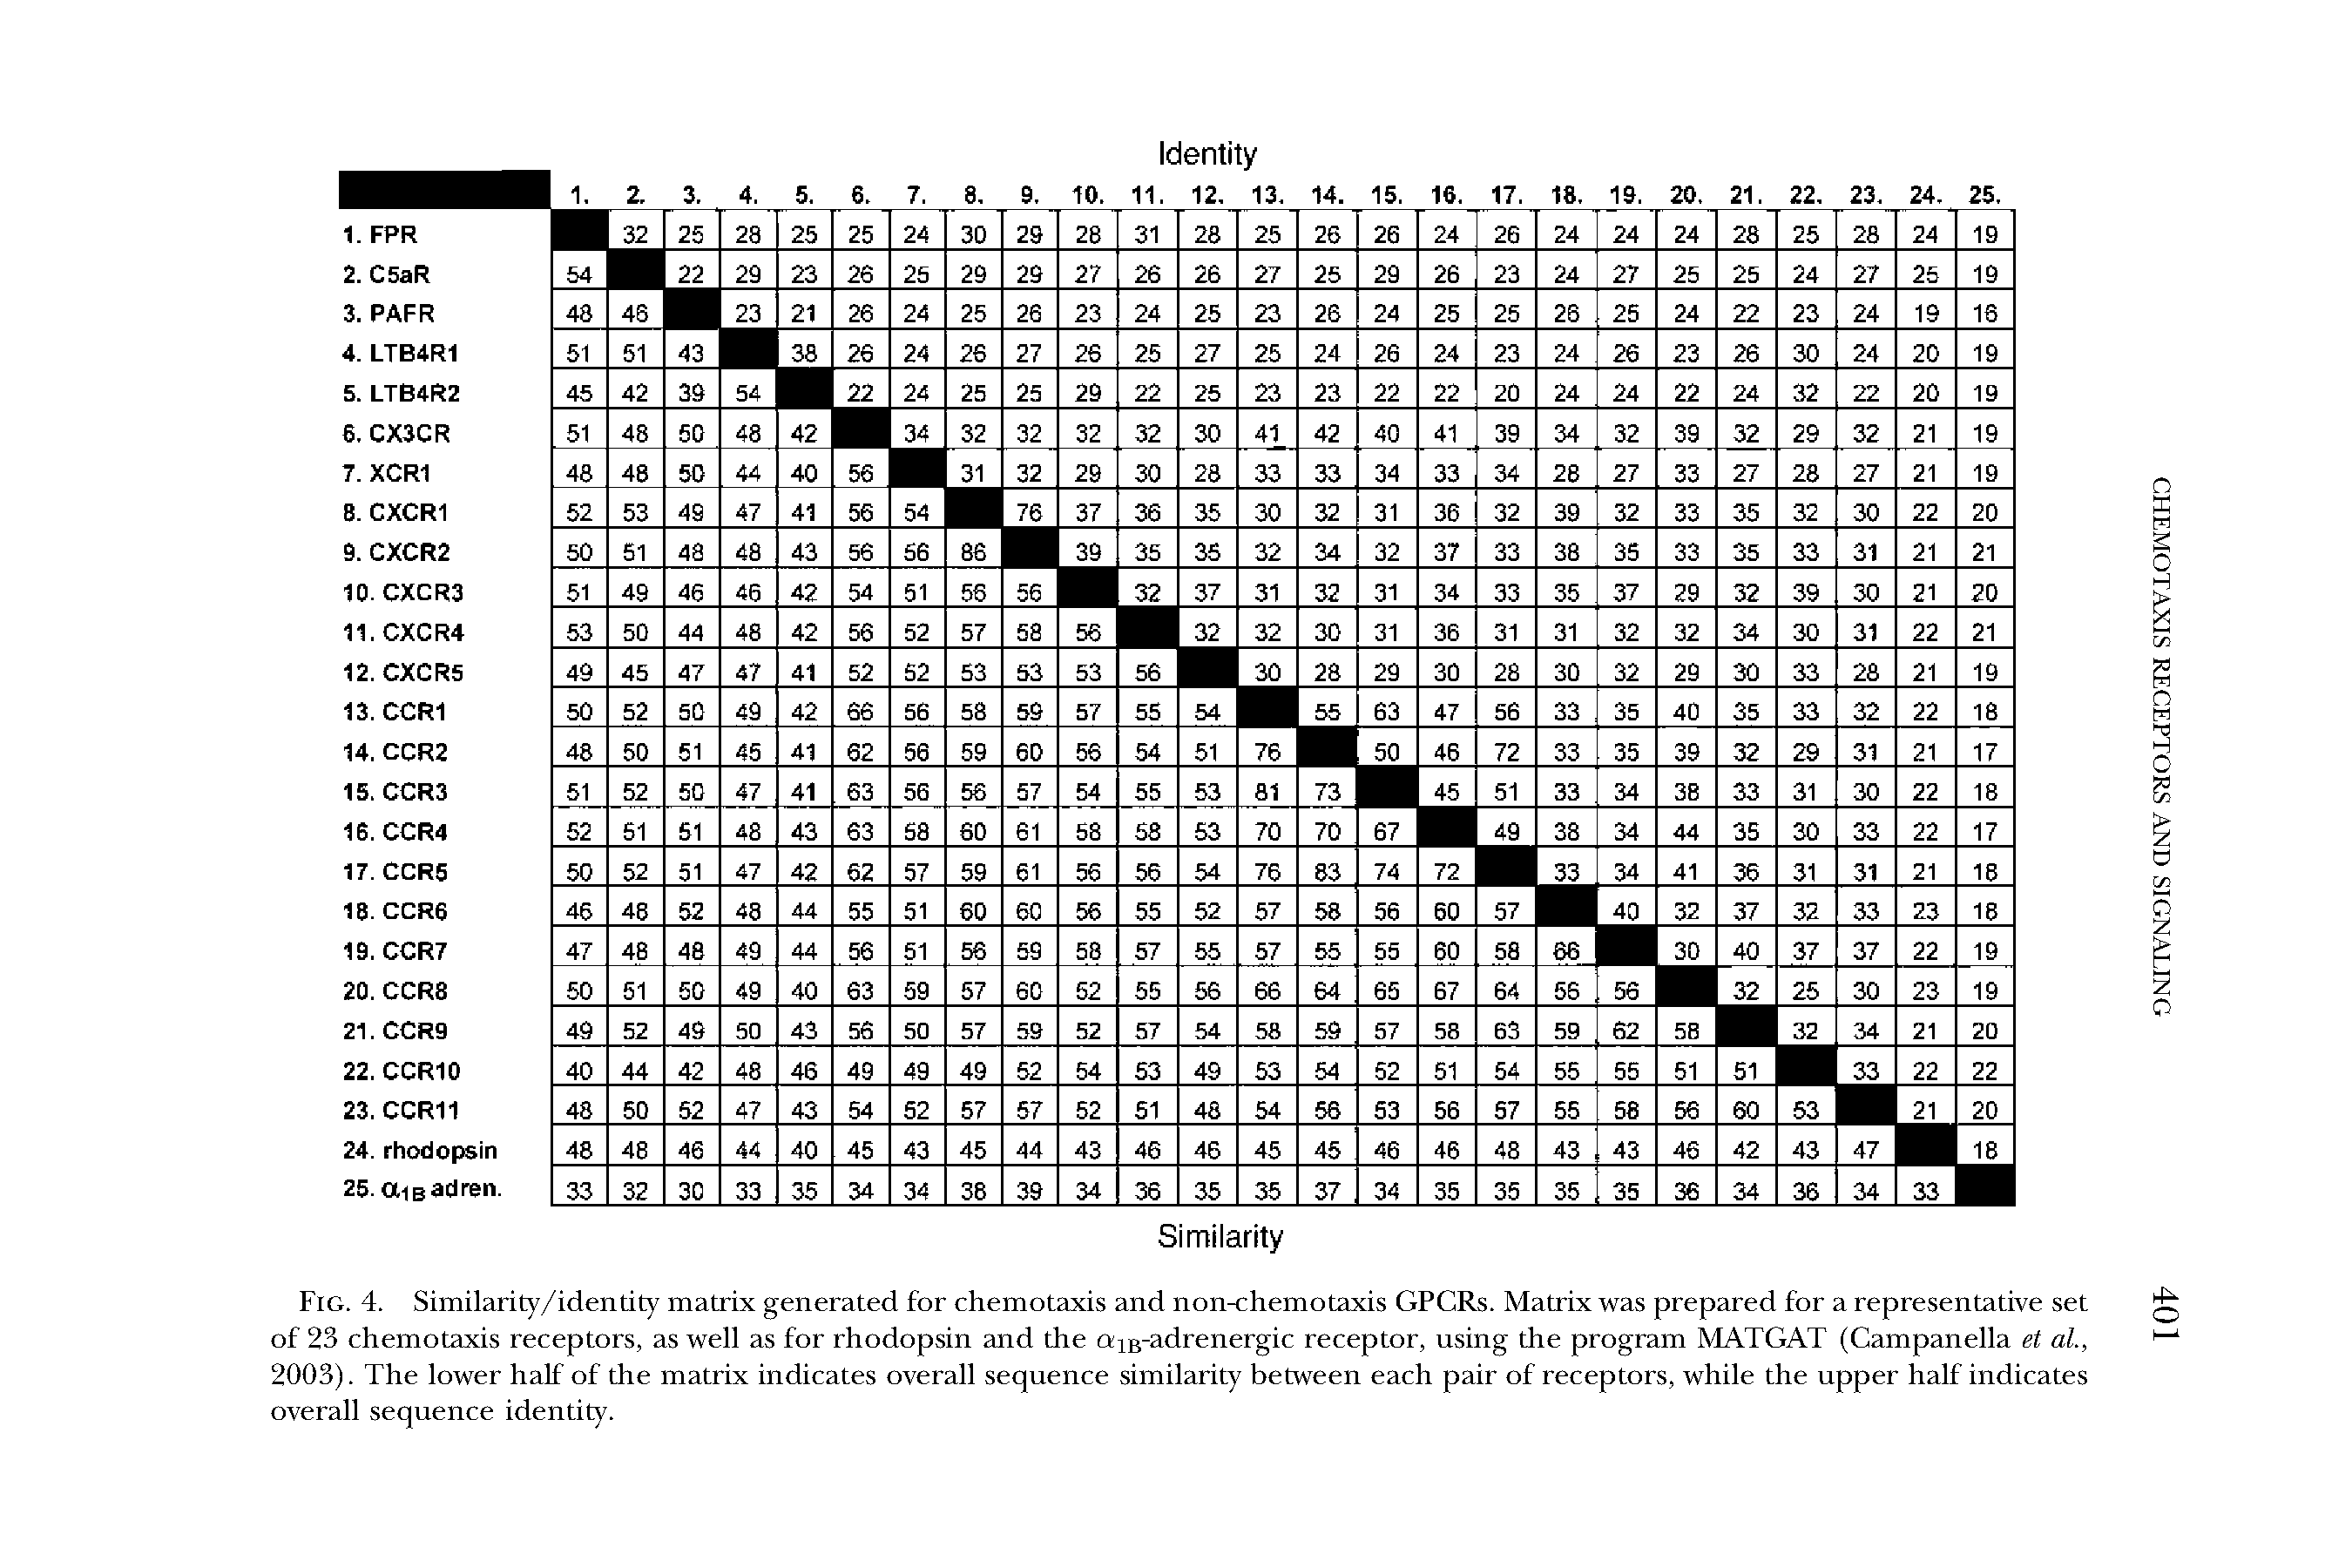 Fig. 4. Similarity/identity matrix generated for chemotaxis and non-chemotaxis GPCRs. Matrix was prepared for a representative set of 23 chemotaxis receptors, as well as for rhodopsin and the OiB-adrenergic receptor, using the program MATGAT (Gampanella et al, 2003). The lower half of the matrix indicates overall sequence similarity between each pair of receptors, while the upper half indicates overall sequence identity.